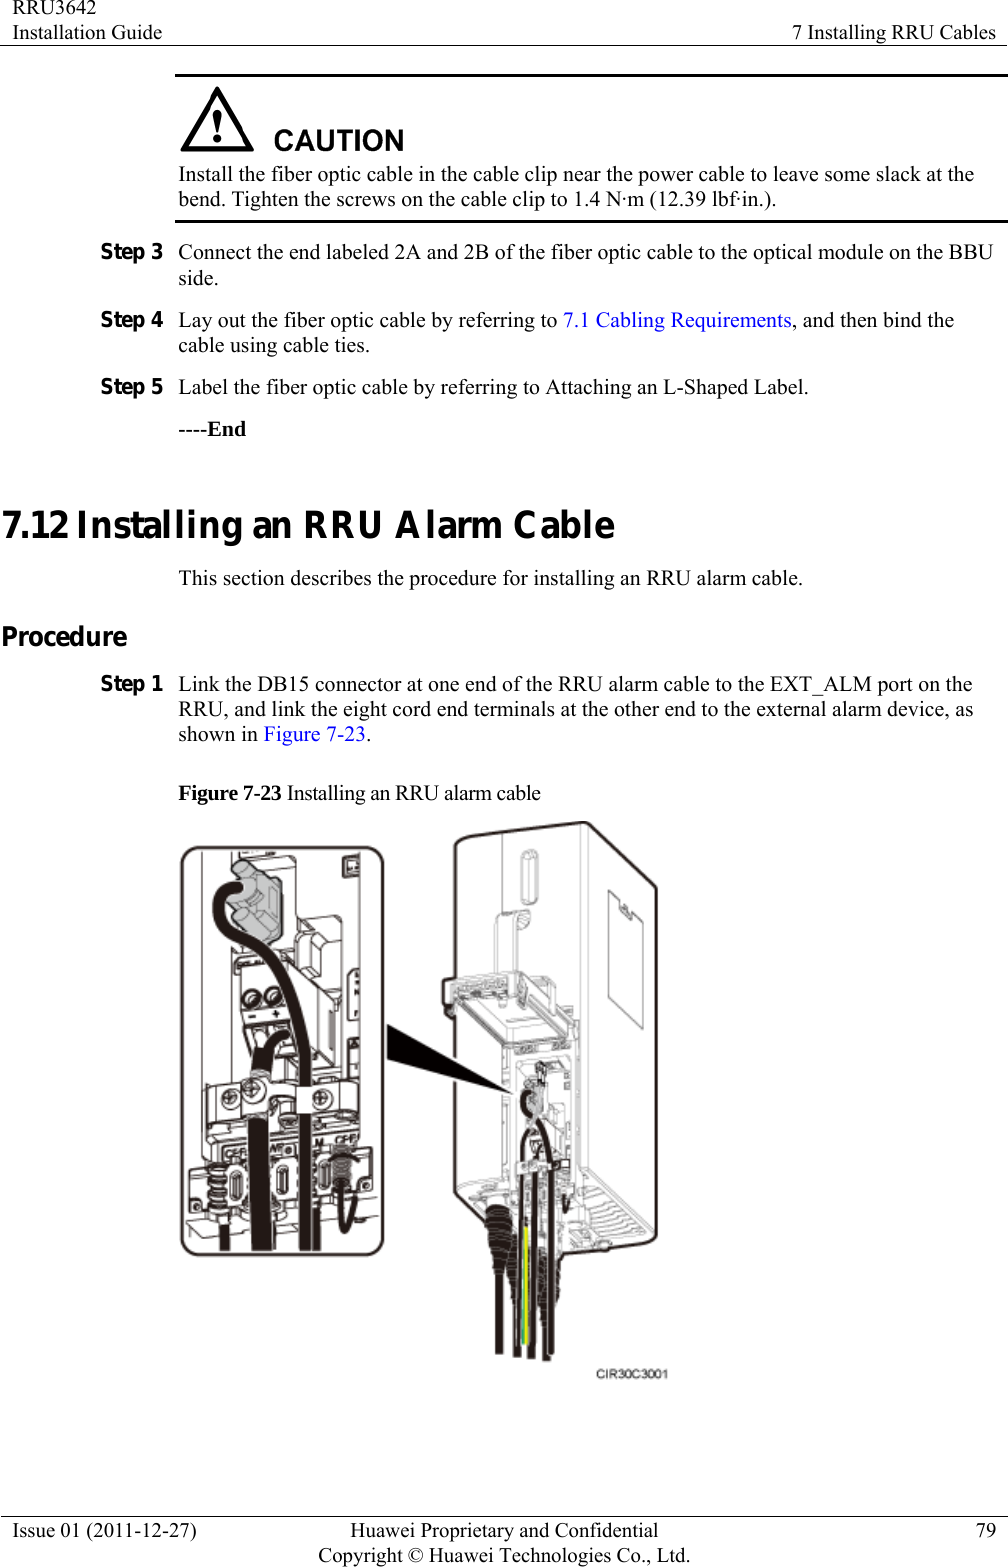 RRU3642 Installation Guide  7 Installing RRU Cables Issue 01 (2011-12-27)  Huawei Proprietary and Confidential         Copyright © Huawei Technologies Co., Ltd.79  Install the fiber optic cable in the cable clip near the power cable to leave some slack at the bend. Tighten the screws on the cable clip to 1.4 N·m (12.39 lbf·in.). Step 3 Connect the end labeled 2A and 2B of the fiber optic cable to the optical module on the BBU side. Step 4 Lay out the fiber optic cable by referring to 7.1 Cabling Requirements, and then bind the cable using cable ties. Step 5 Label the fiber optic cable by referring to Attaching an L-Shaped Label. ----End 7.12 Installing an RRU Alarm Cable This section describes the procedure for installing an RRU alarm cable. Procedure Step 1 Link the DB15 connector at one end of the RRU alarm cable to the EXT_ALM port on the RRU, and link the eight cord end terminals at the other end to the external alarm device, as shown in Figure 7-23. Figure 7-23 Installing an RRU alarm cable   